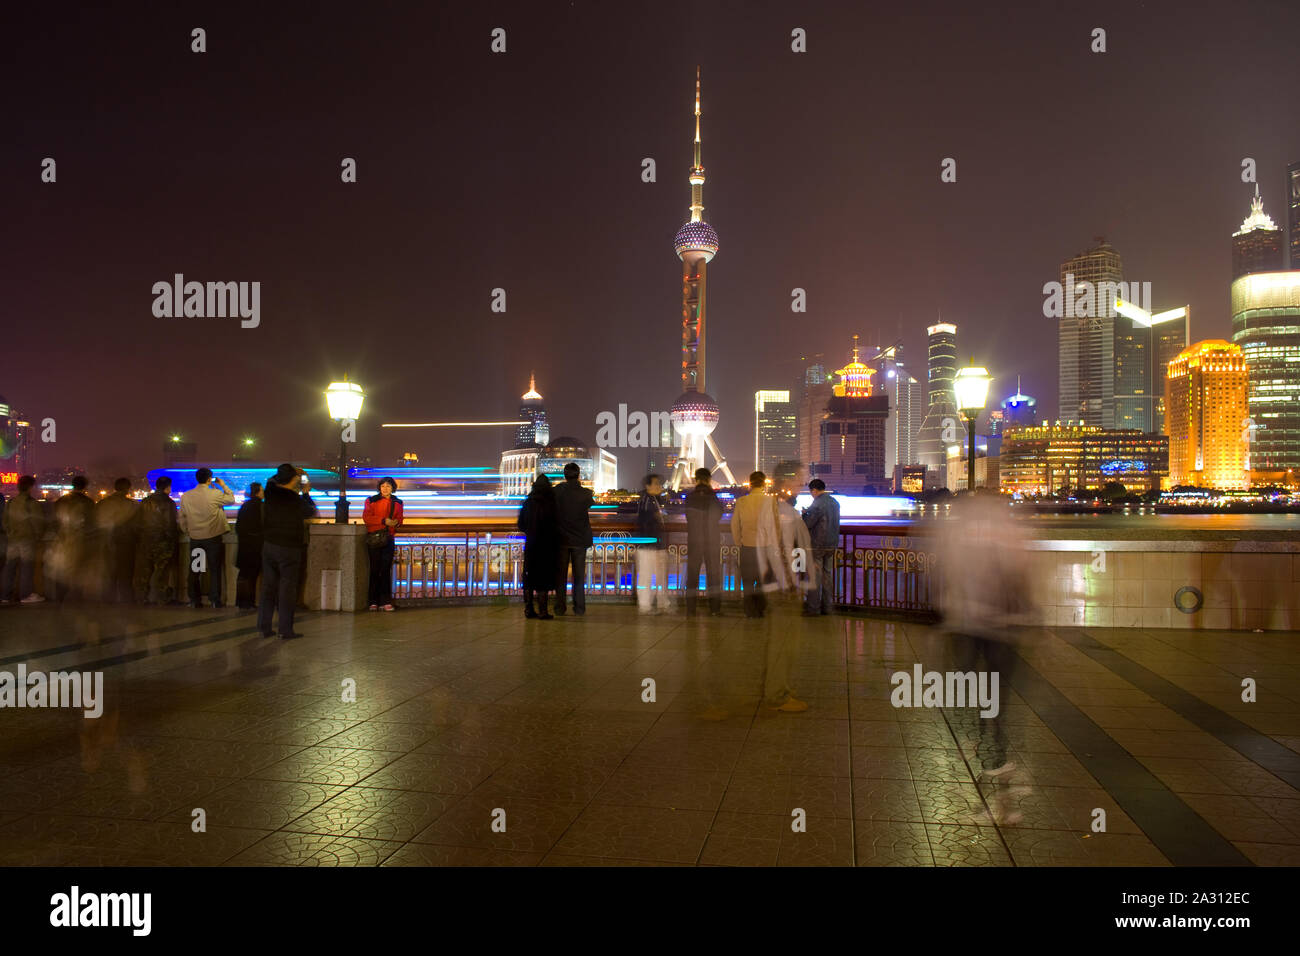 Shanhai, China - People at The Bund riverside looking at the skyline of Lujiazui and Pudong with the Oriental Pearl Tower Stock Photo